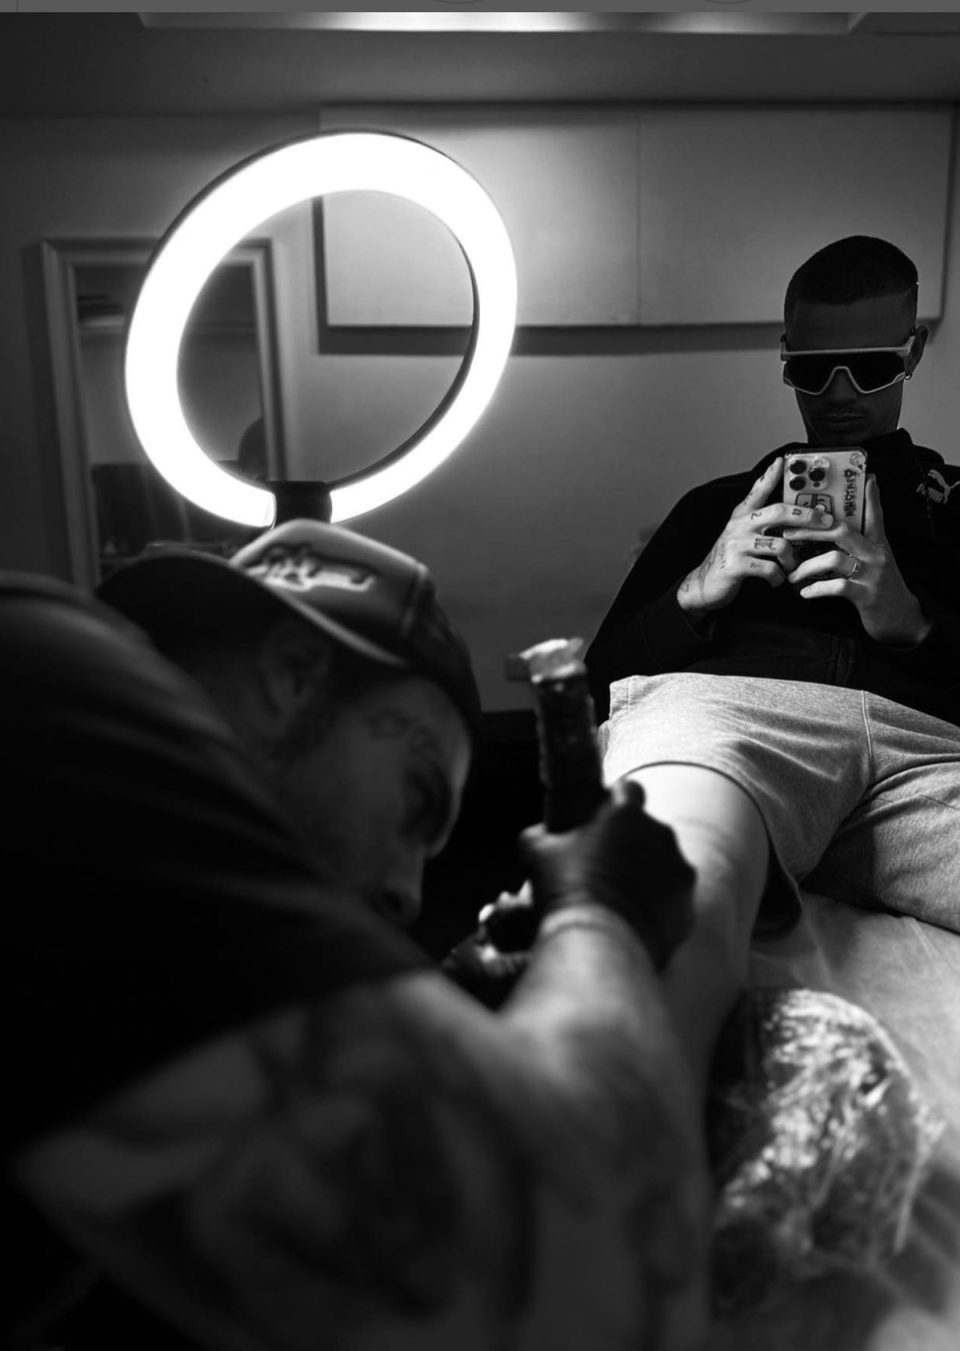 Romeo Beckham looking relaxed getting his leg tattoo (Instagram via @certifiedletterboy)